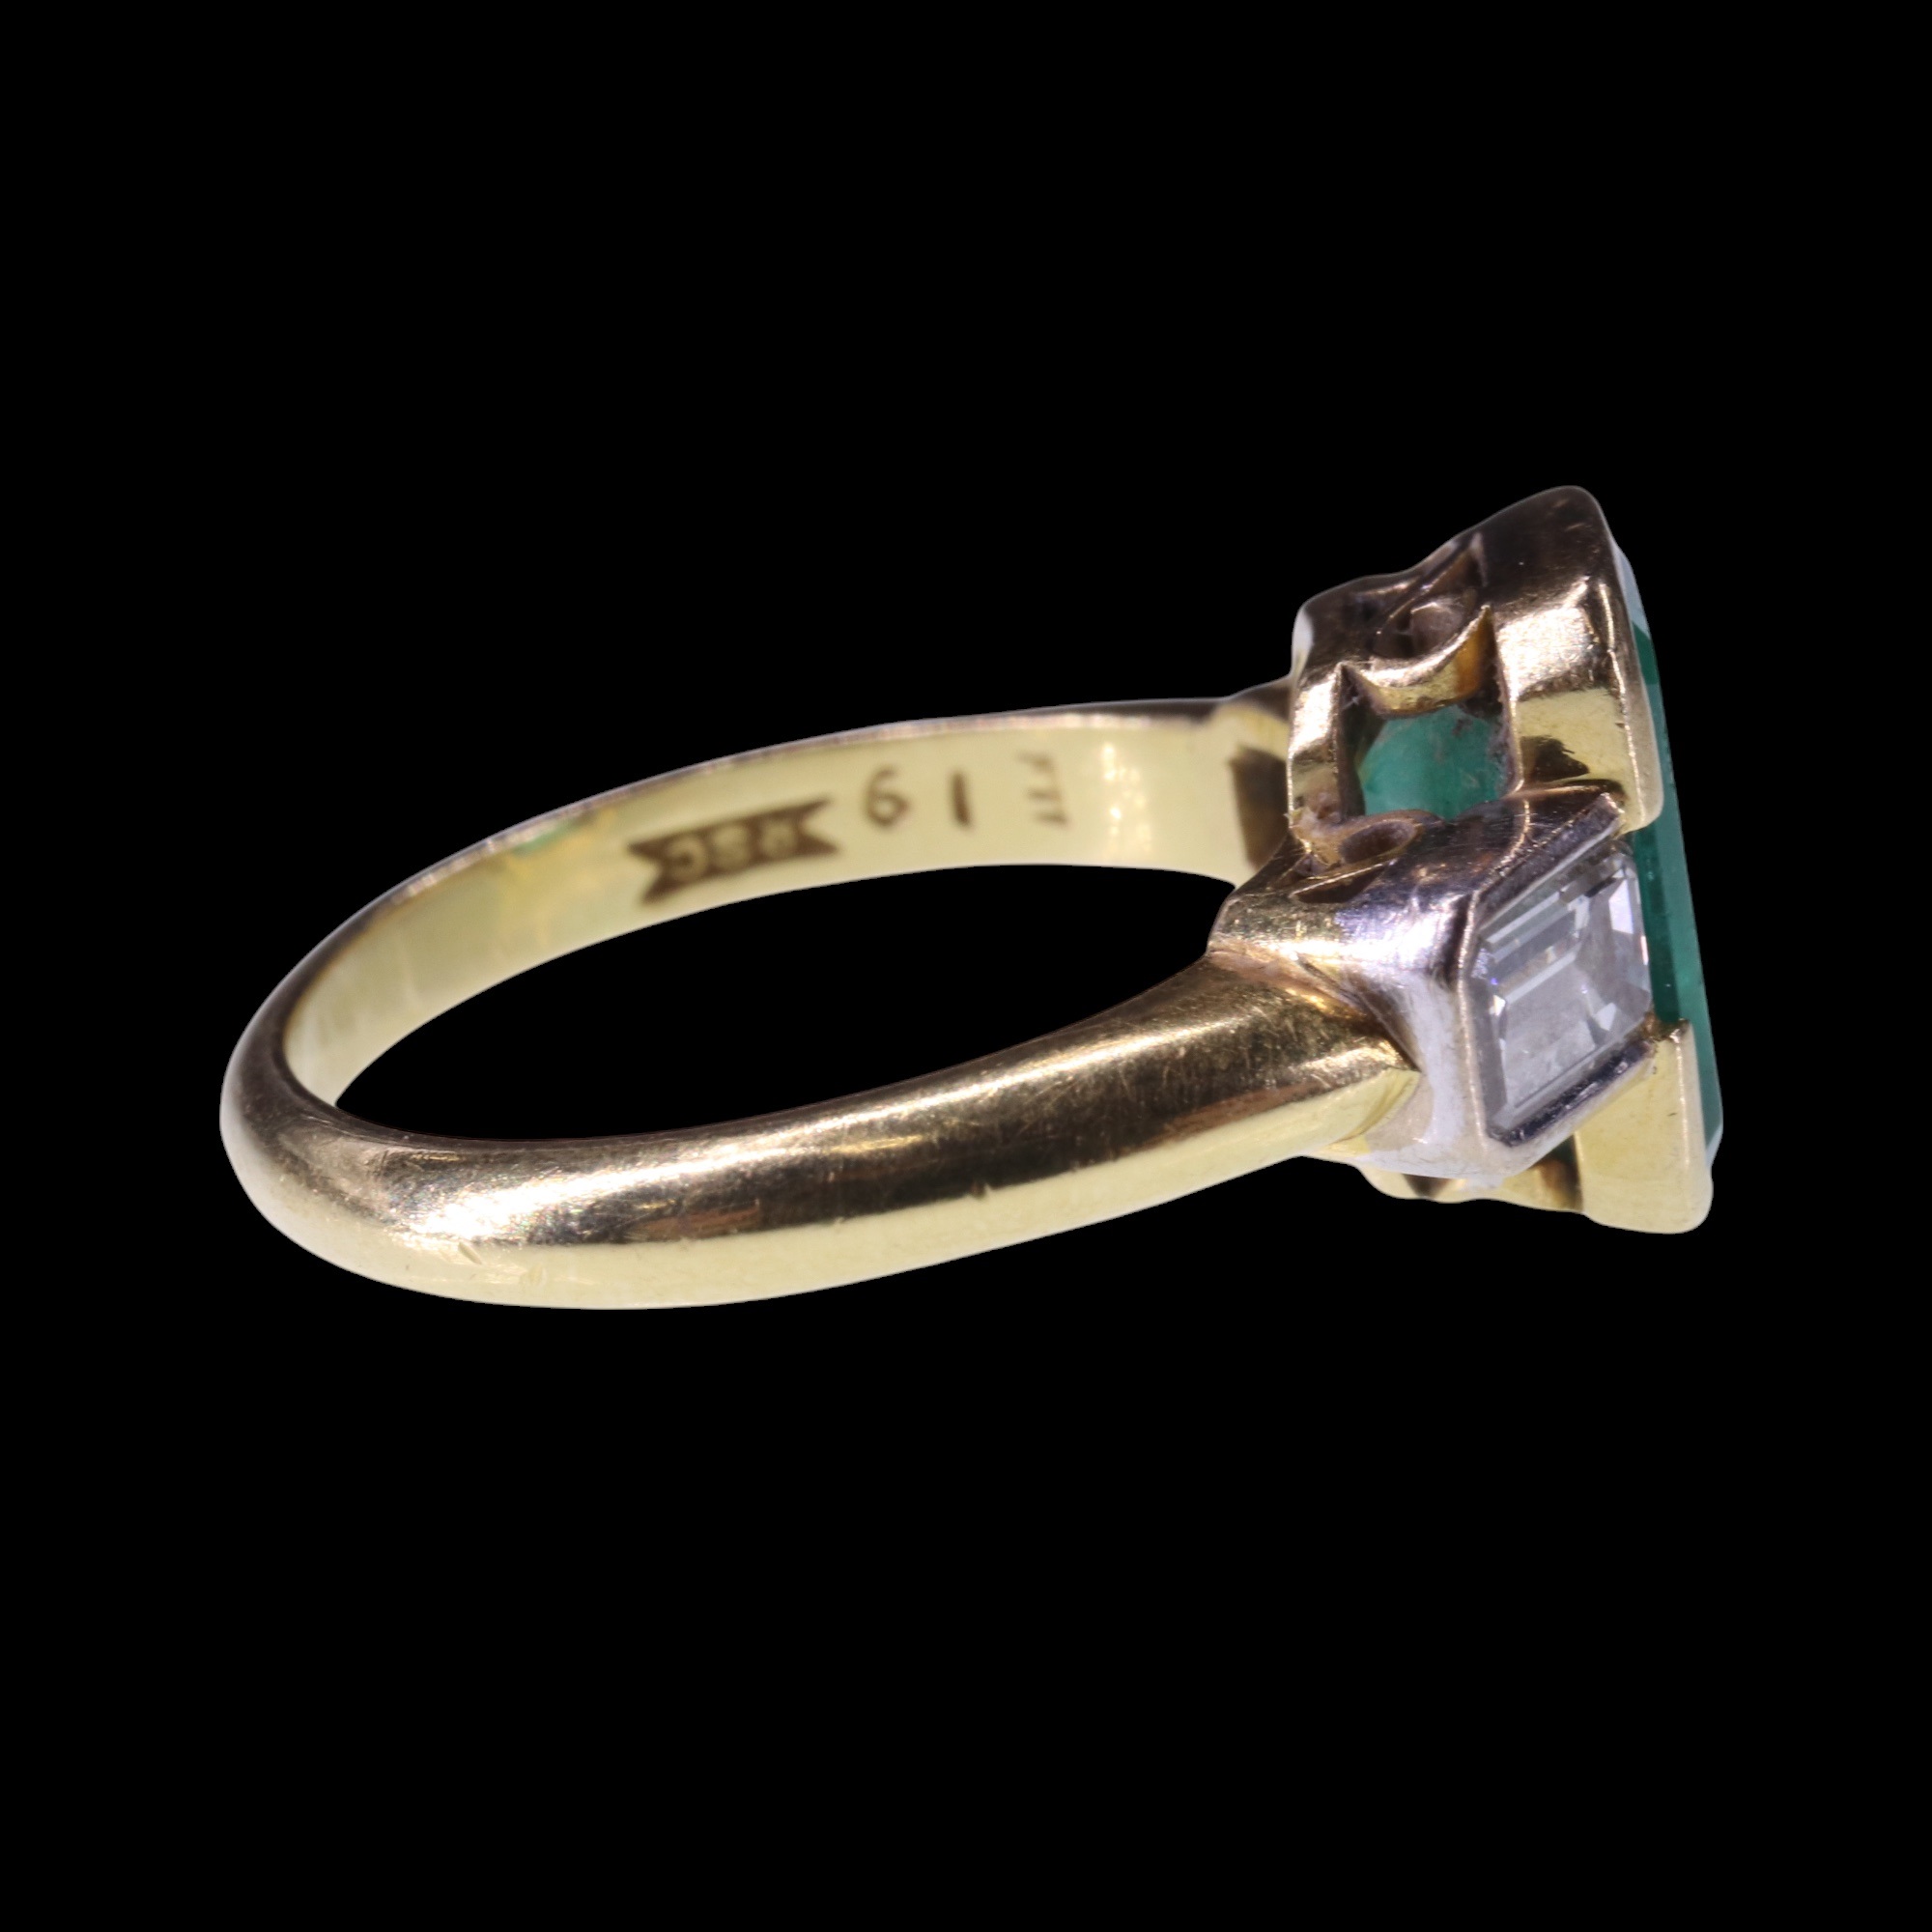 An impressive Art Deco style emerald and diamond ring, comprising a large emerald-cut stone of - Image 3 of 4